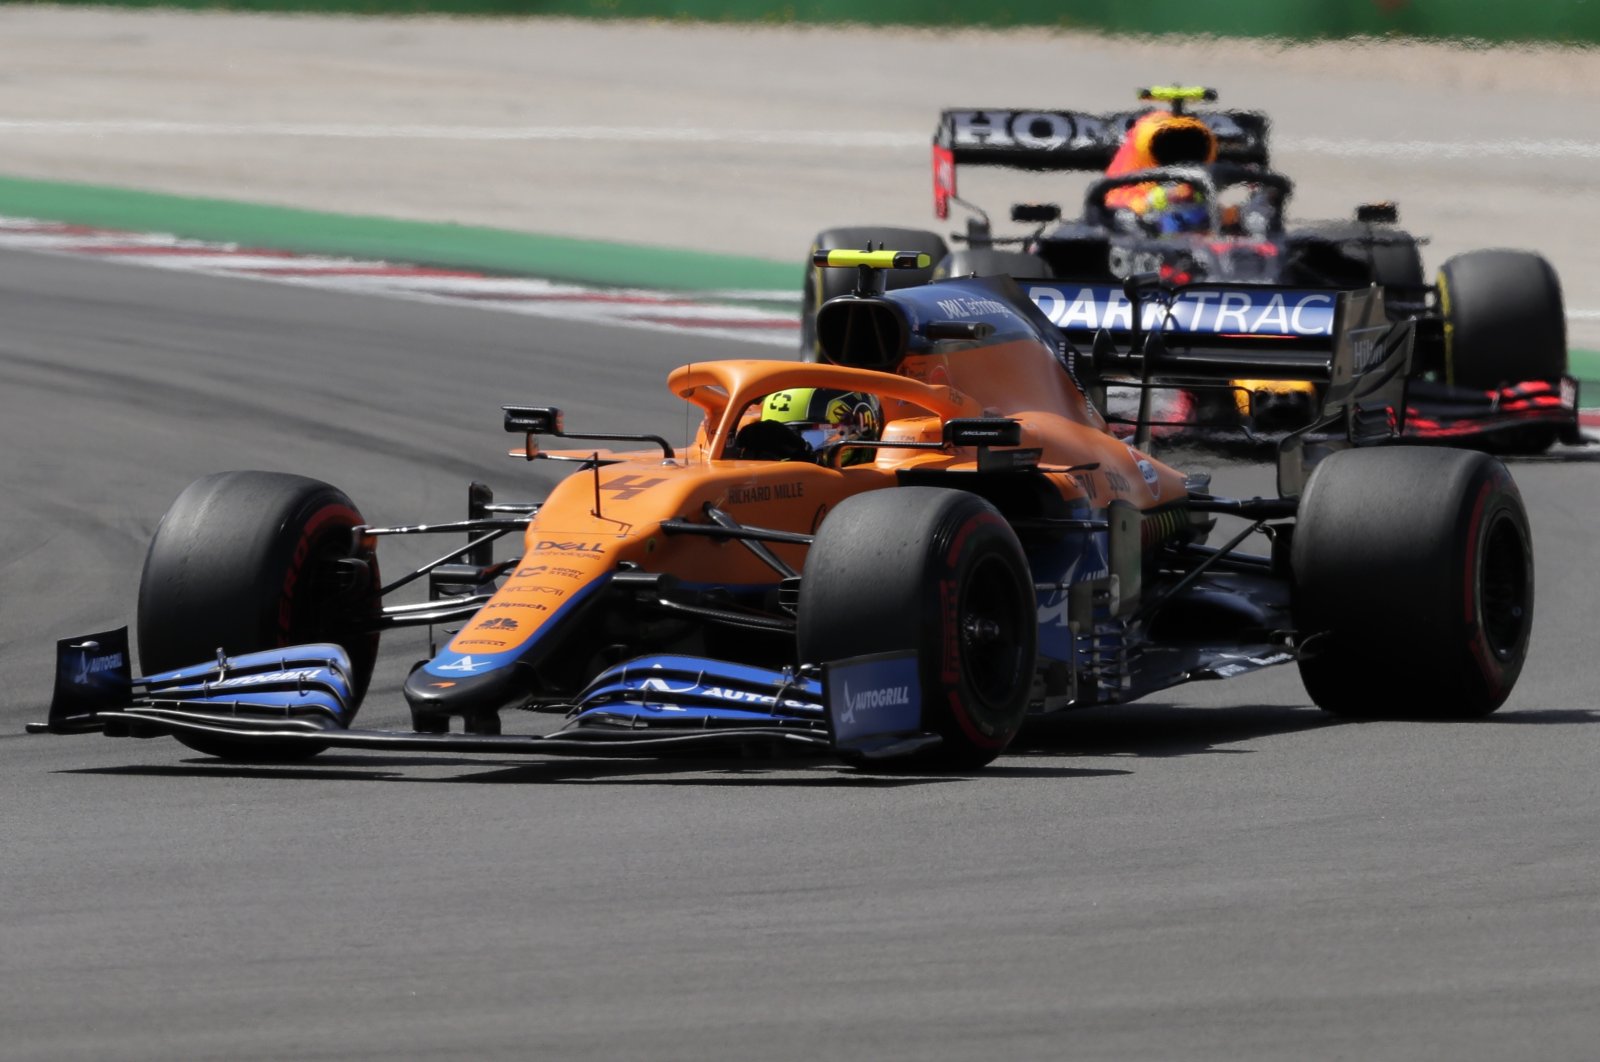 Mclaren driver Lando Norris of Britain (front) takes a curve during the Portugal Formula One Grand Prix at the Algarve International Circuit near Portimao, Portugal, May 2, 2021. (AP Photo)